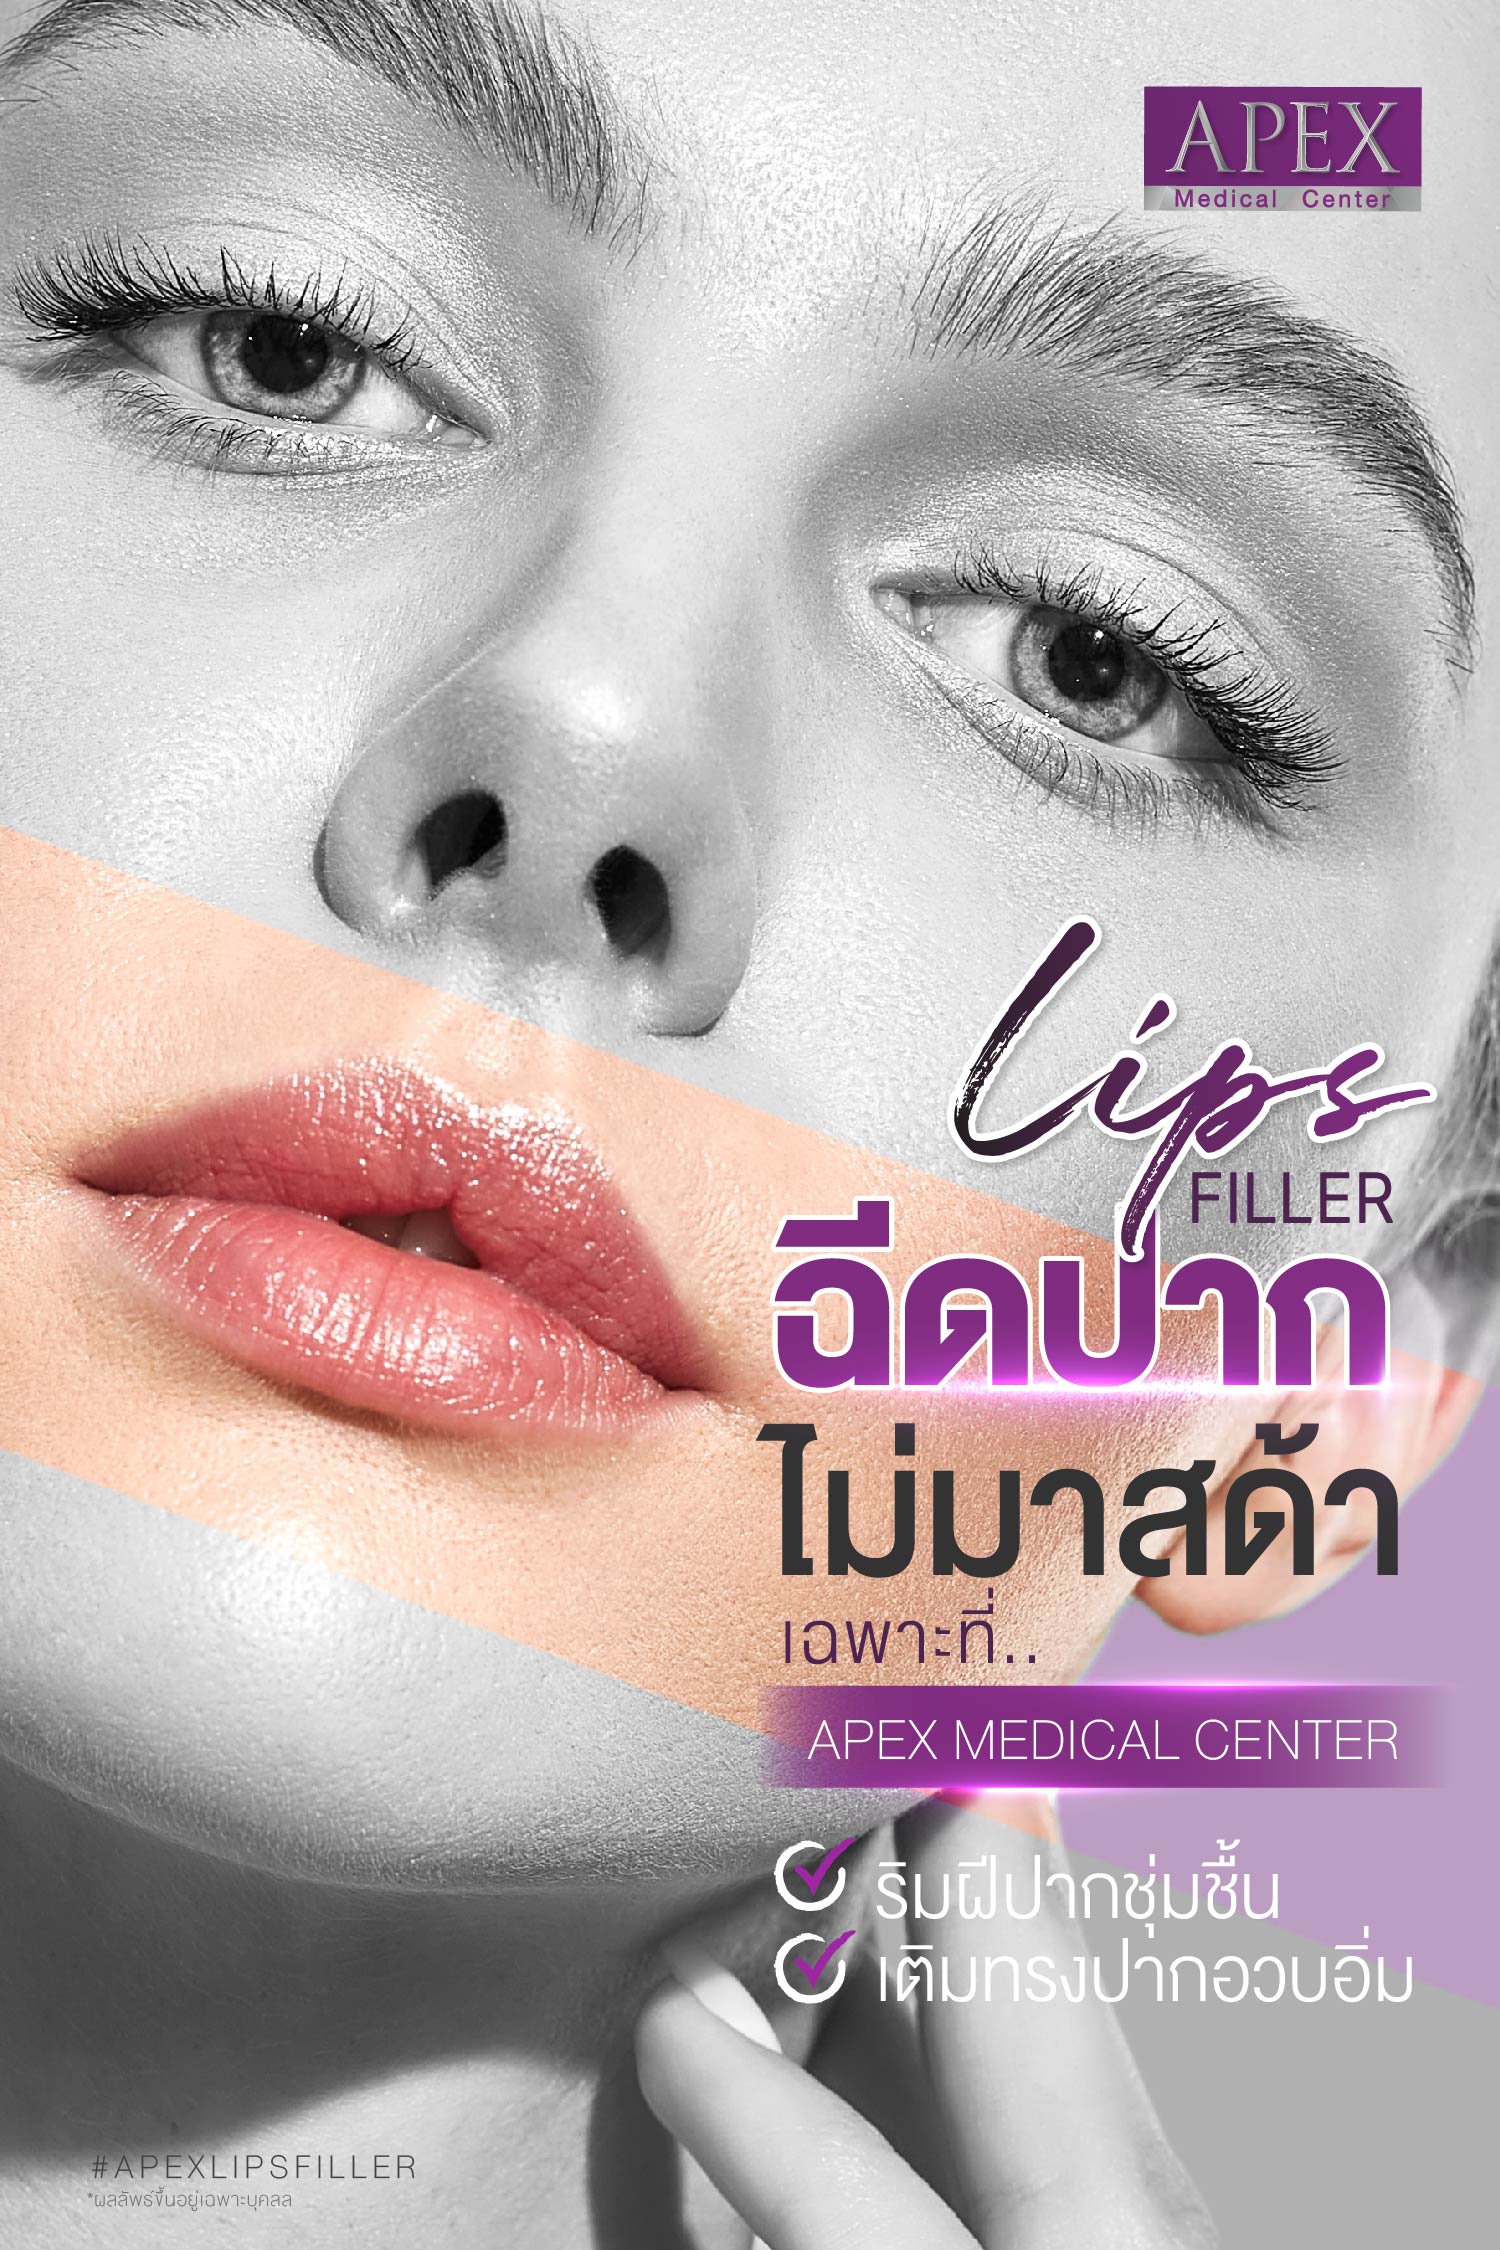 Filler injections for plump lipsare a series of injections that shape and plump up your lip.